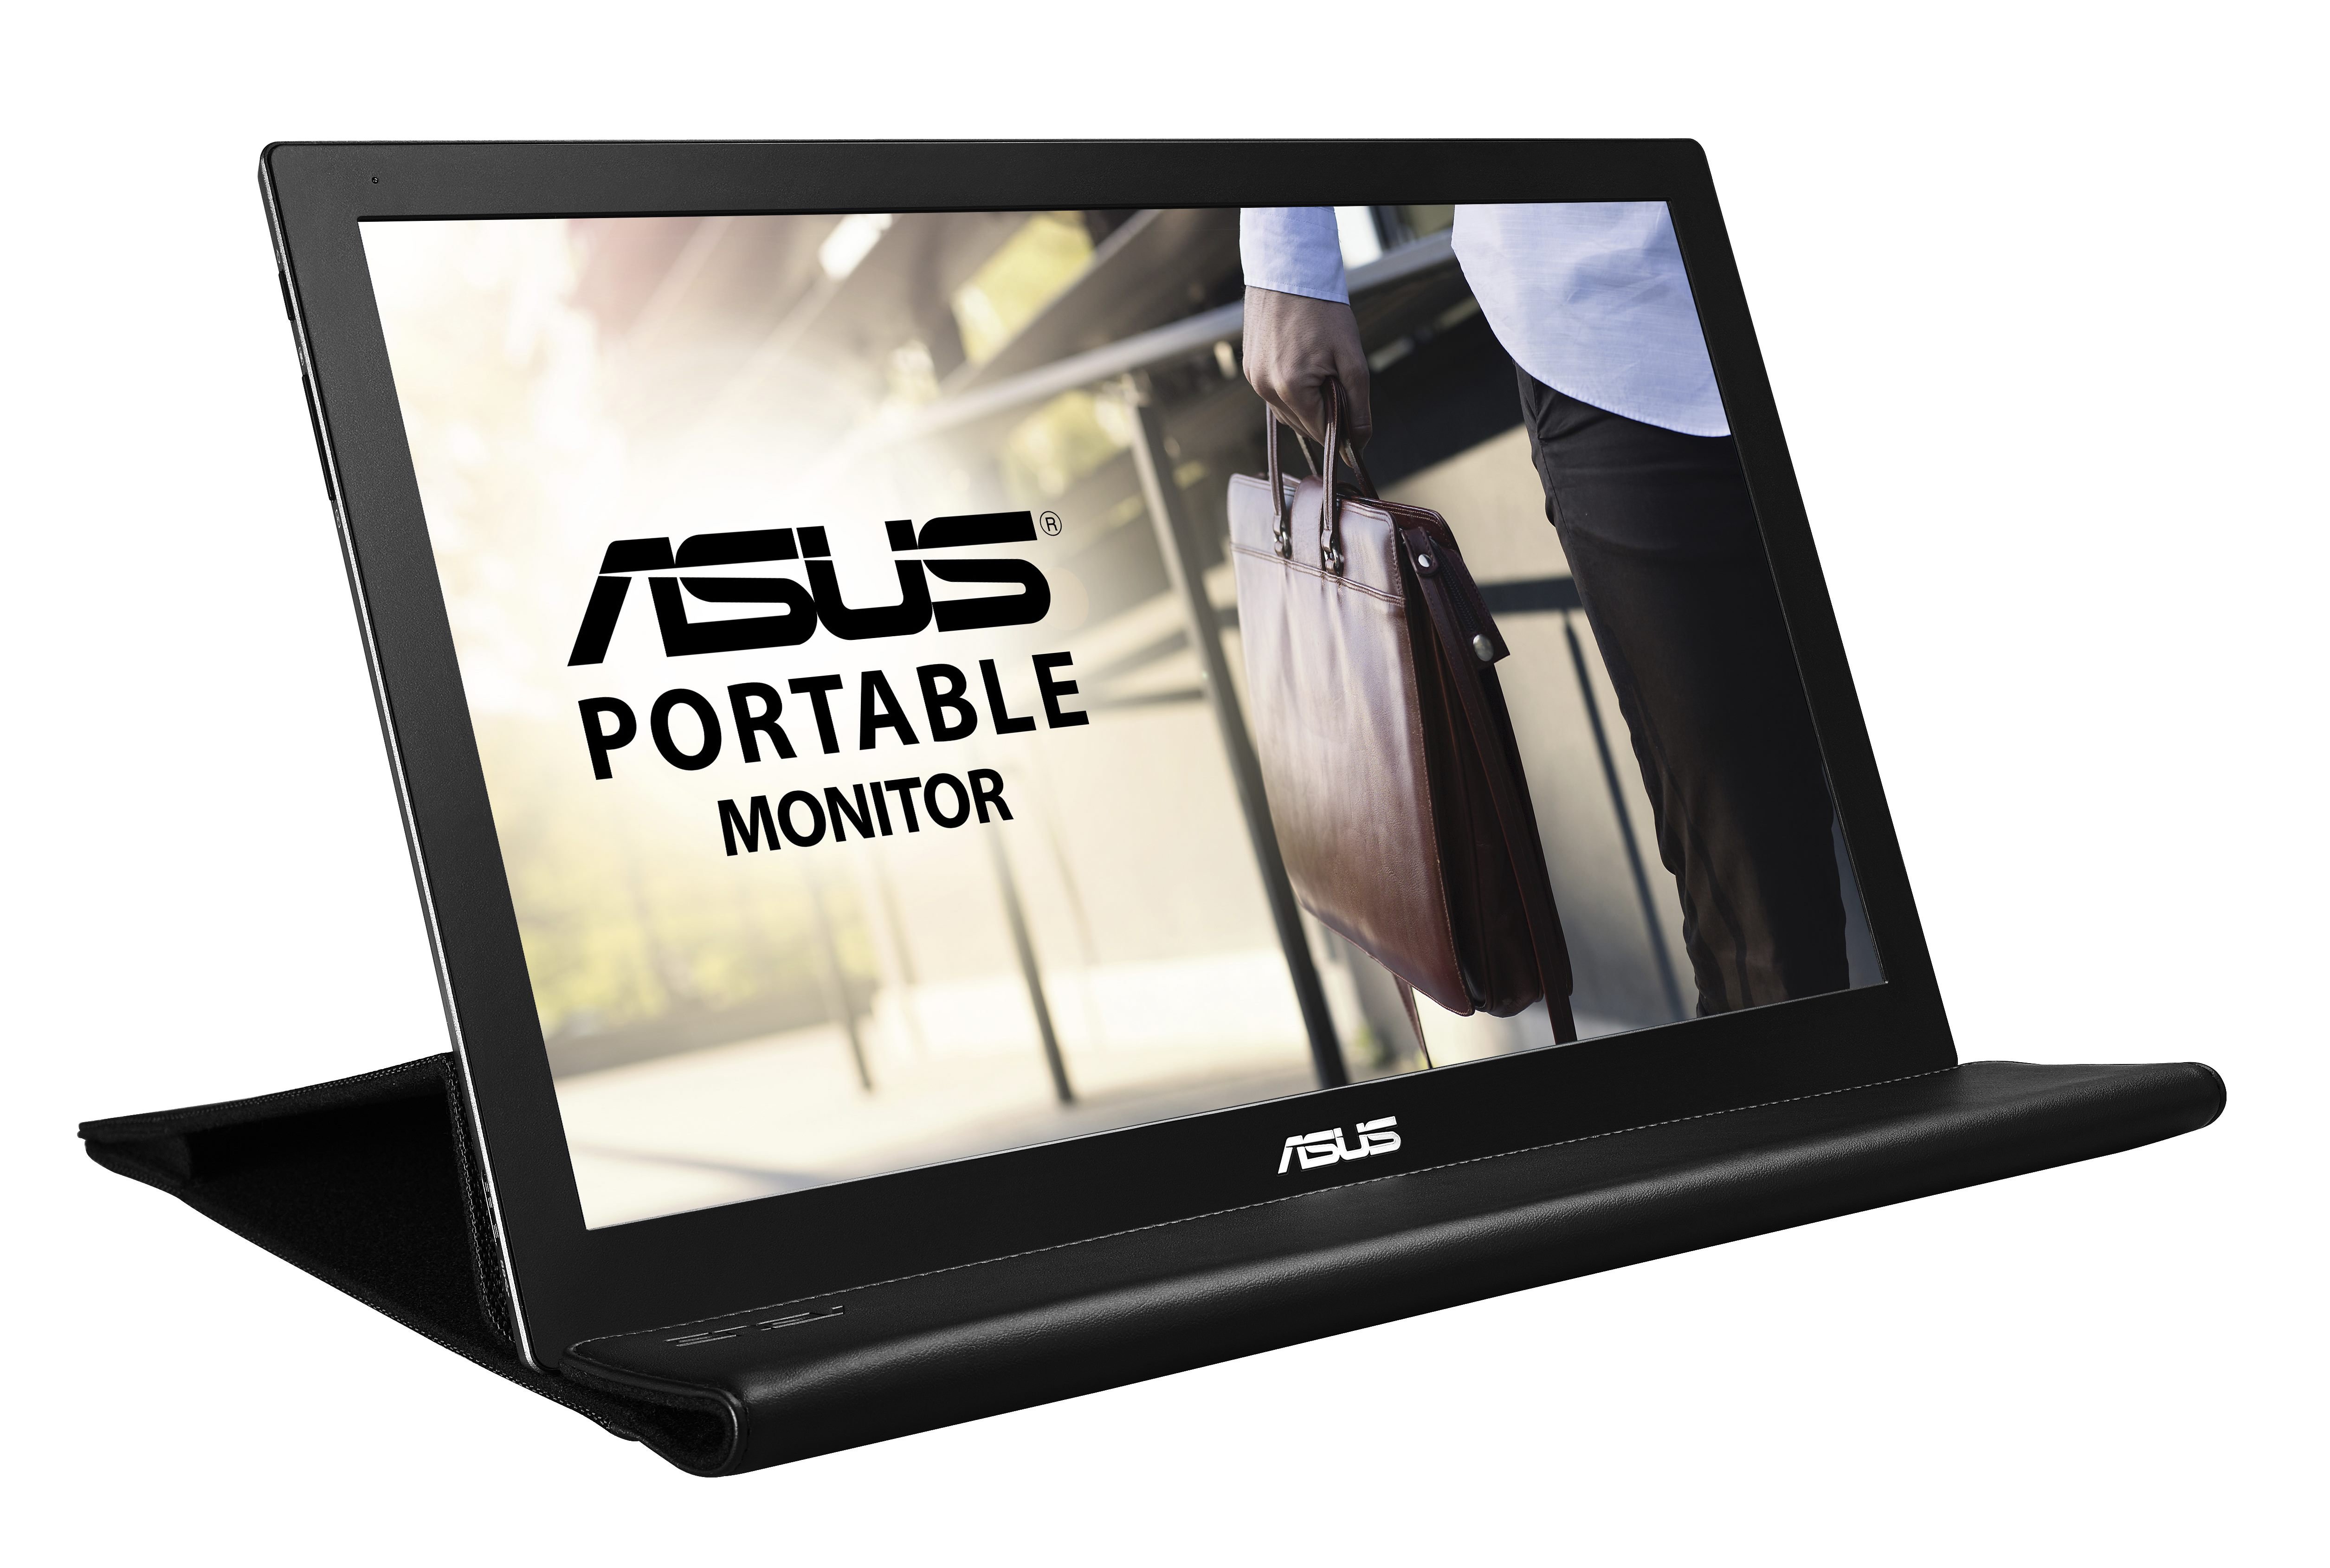 ASUS MB168B 15.6in Portable USB Monitor Review